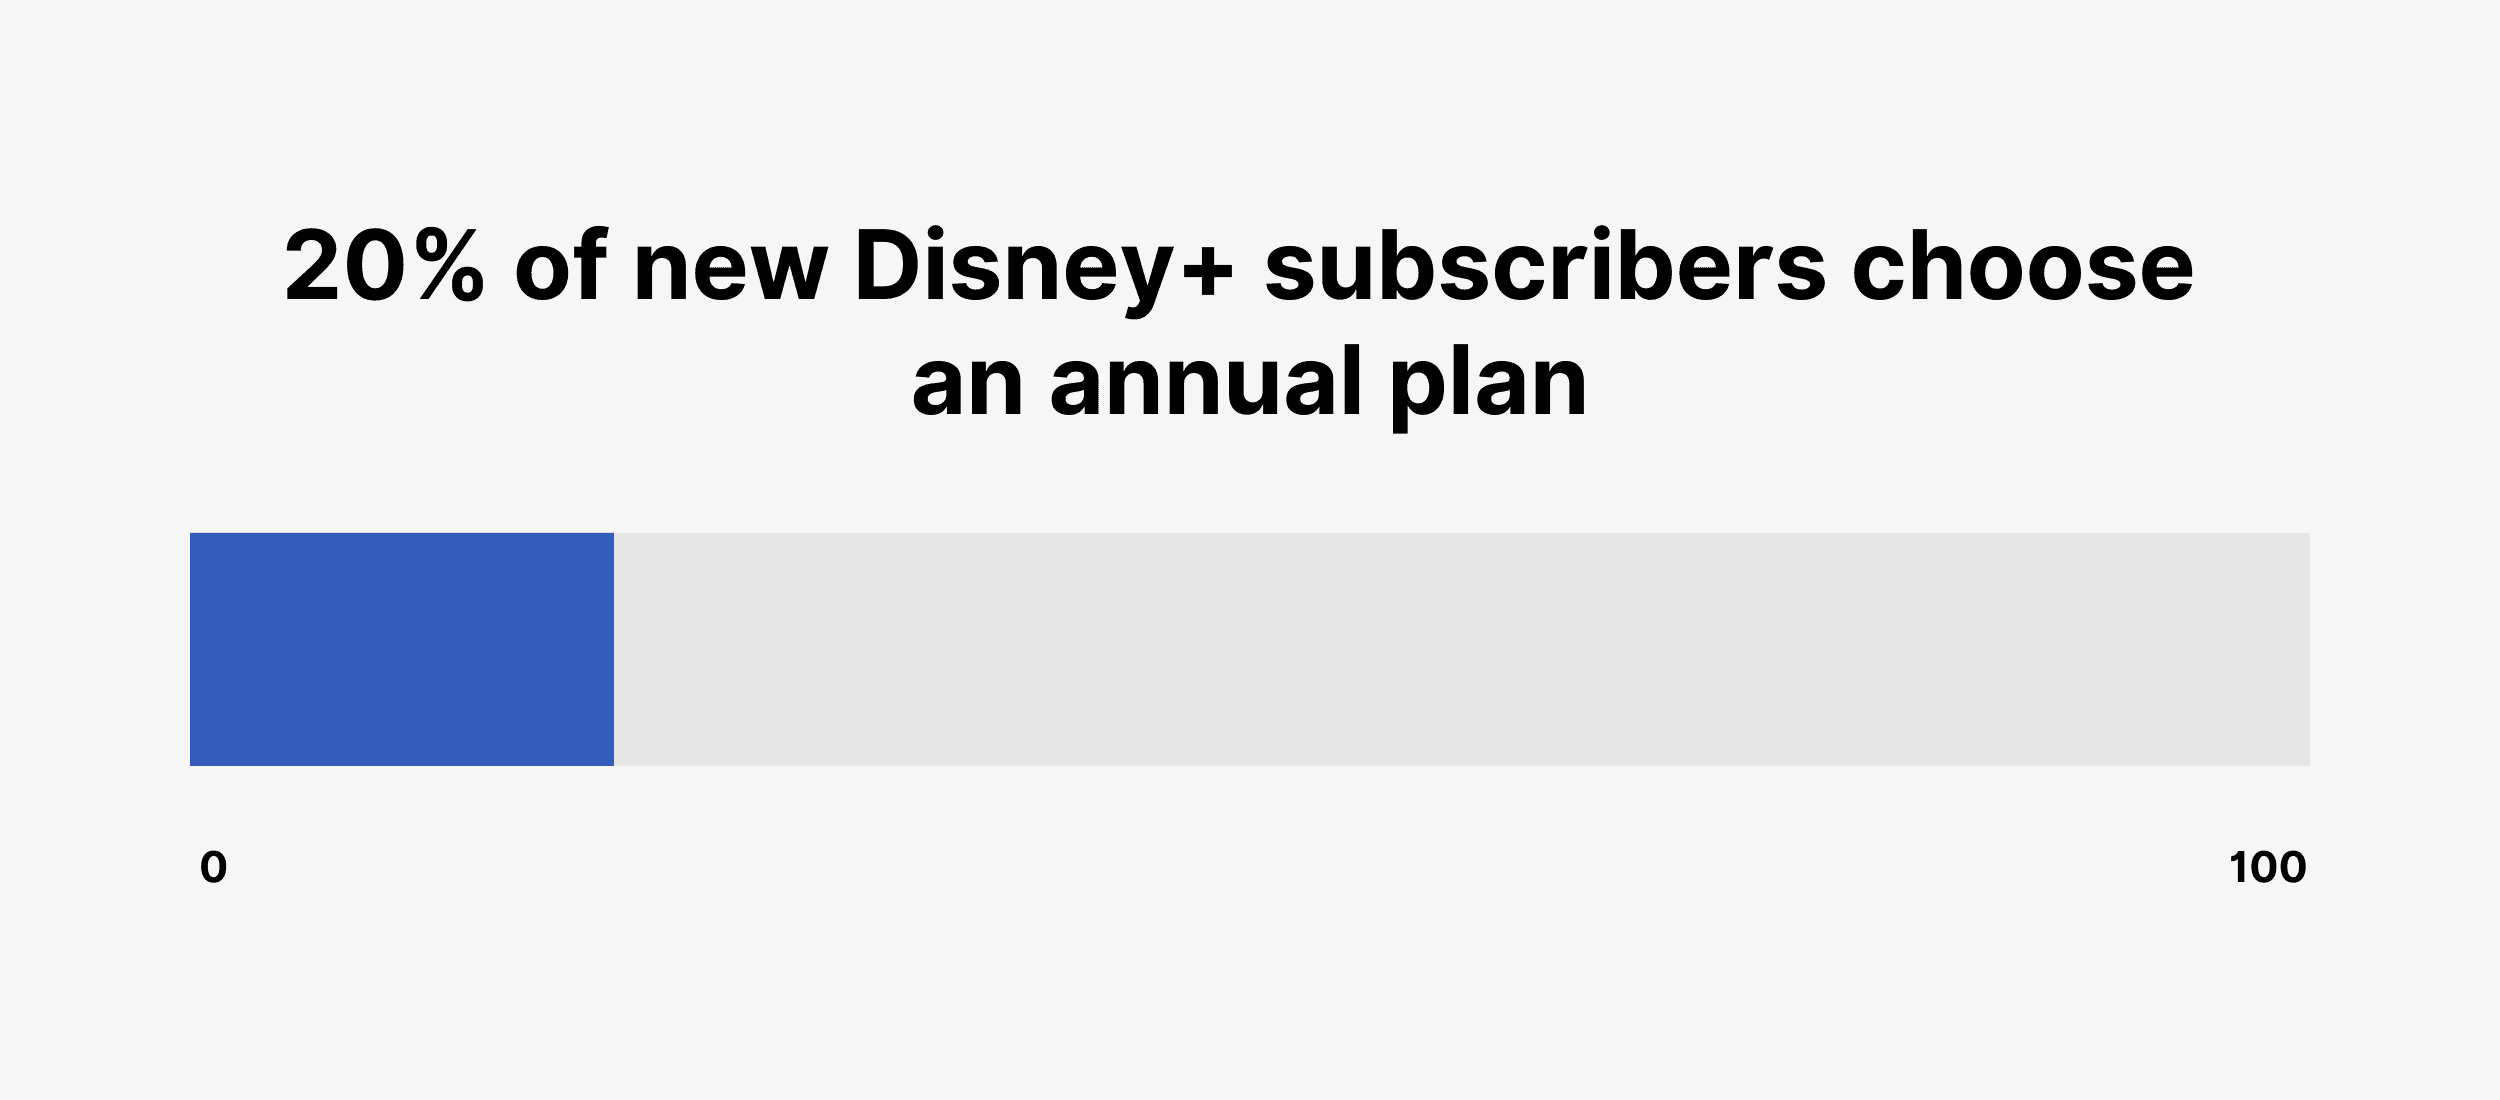 20% of new Disney+ subscribers choose an annual plan